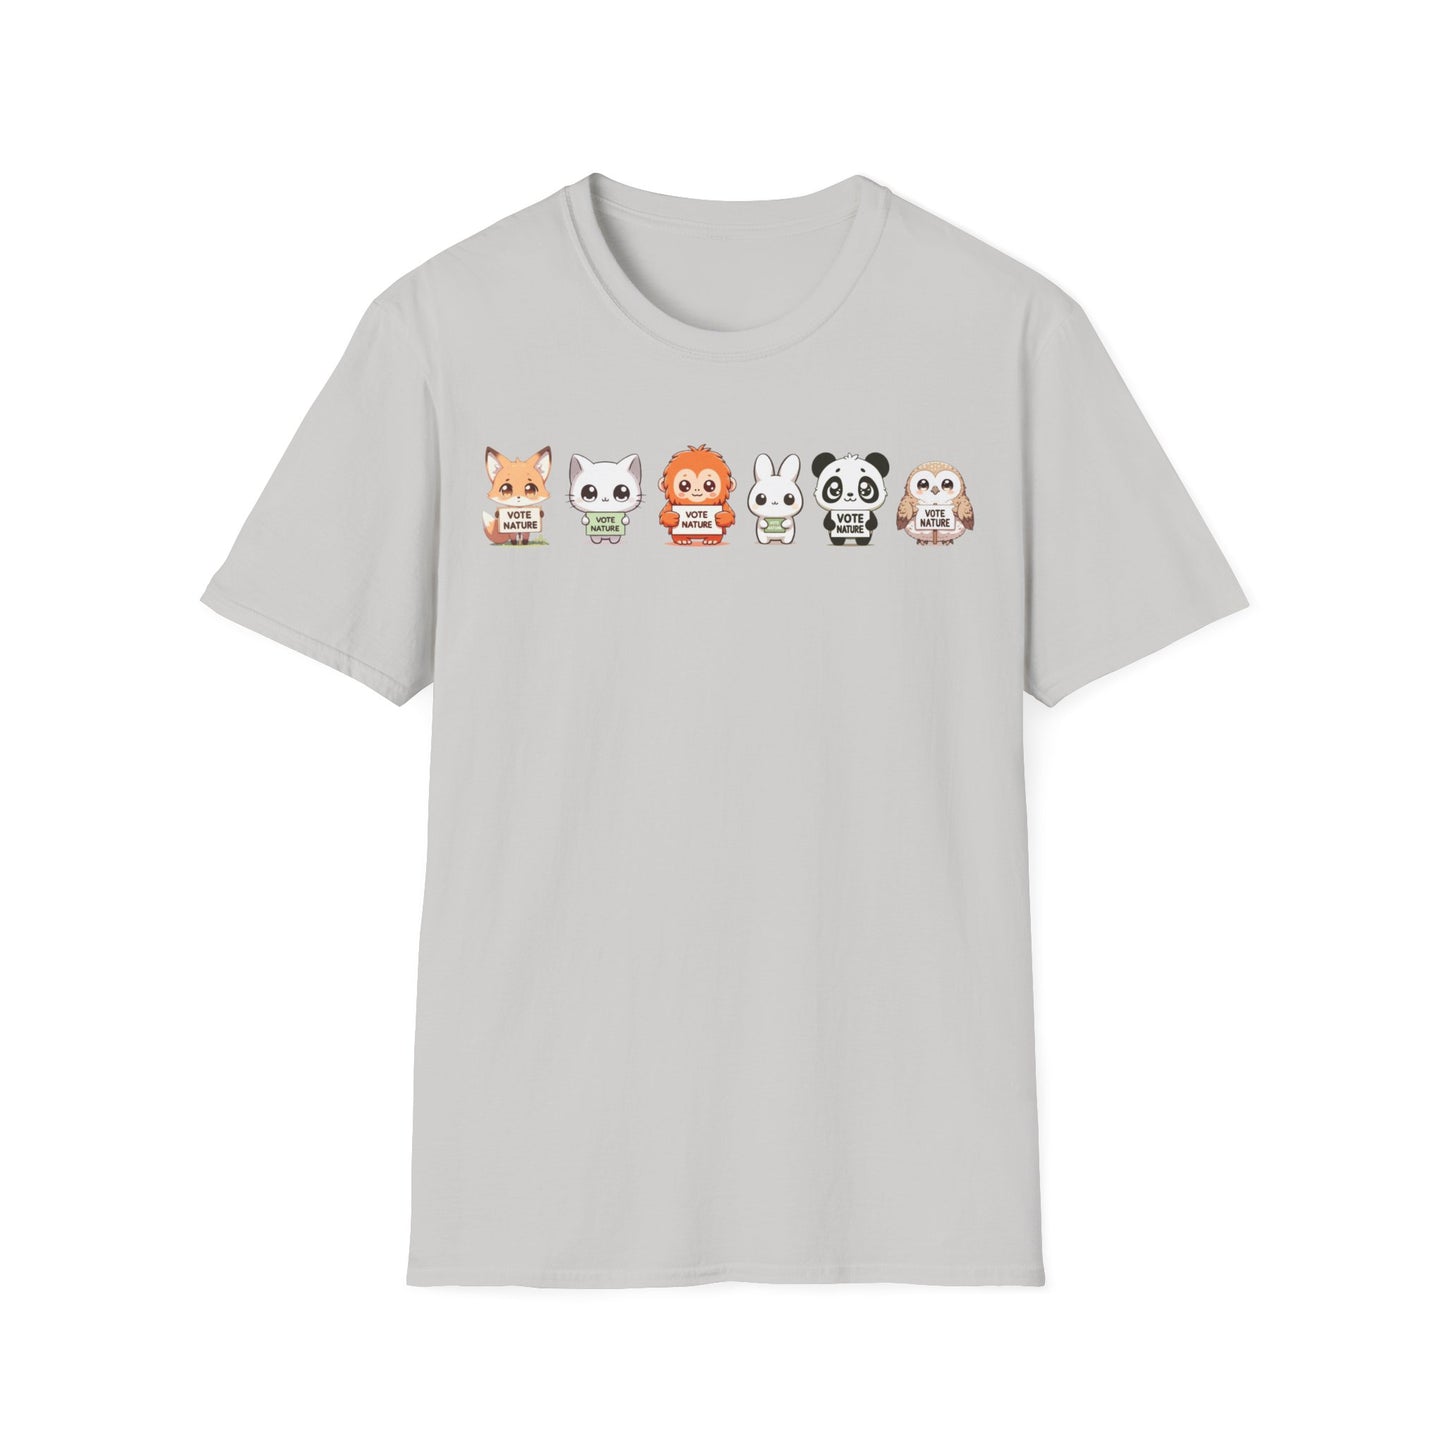 All the Cuteness! Inspiring Statement Soft Style t-shirt: Vote Nature |unisex| Minimalist Protest, Resistance, Activism! Show You Care!